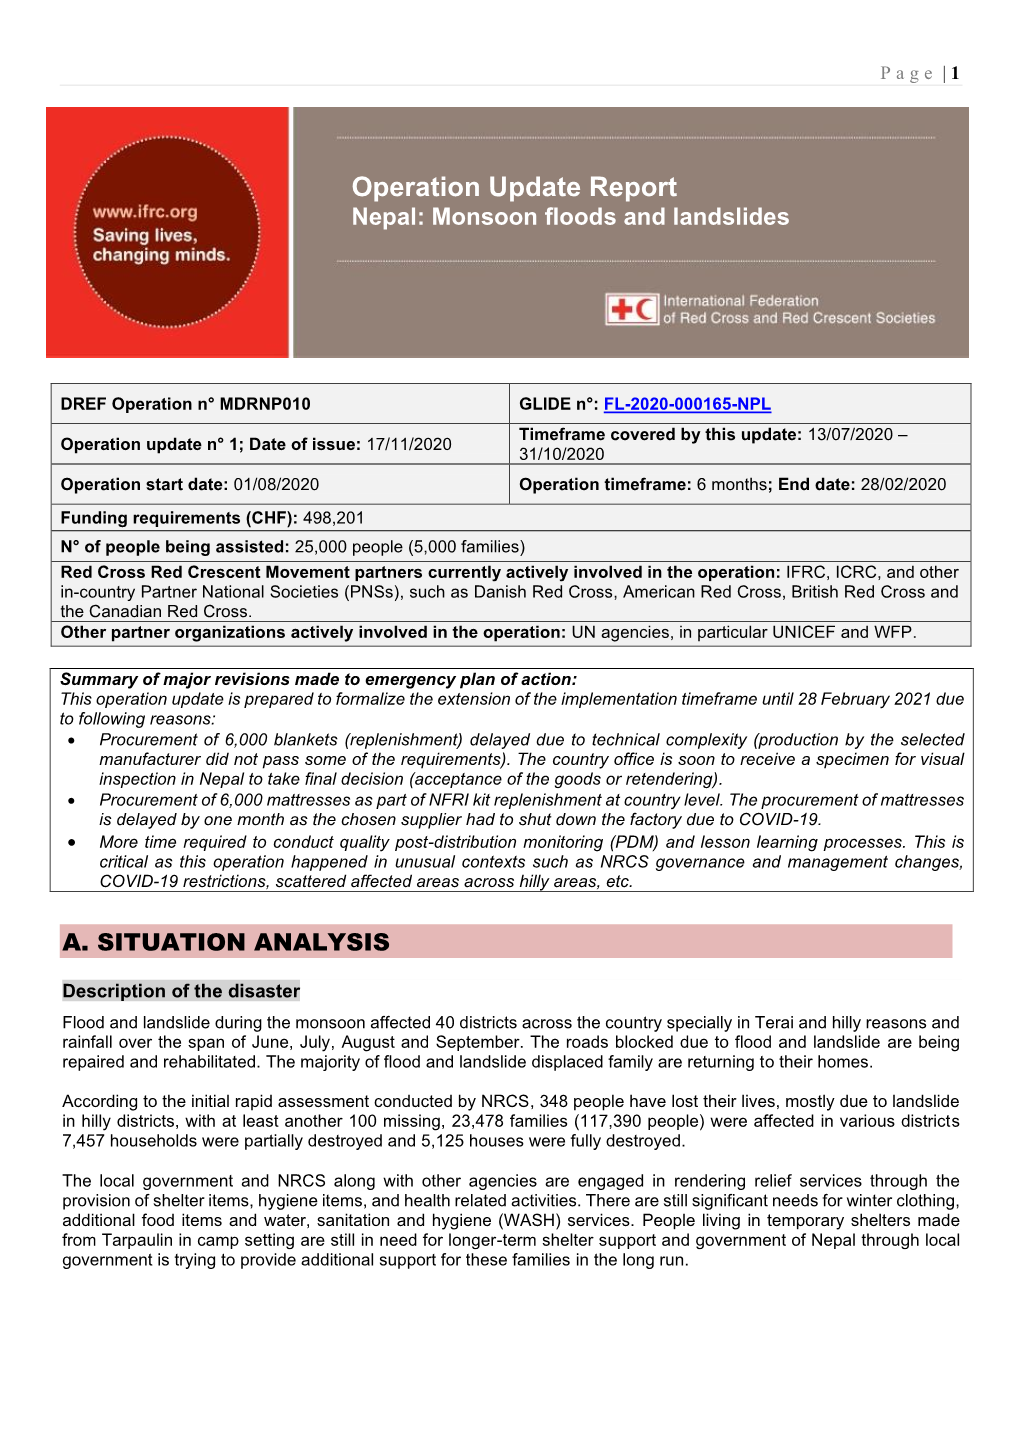 Operation Update Report Nepal: Monsoon Floods and Landslides